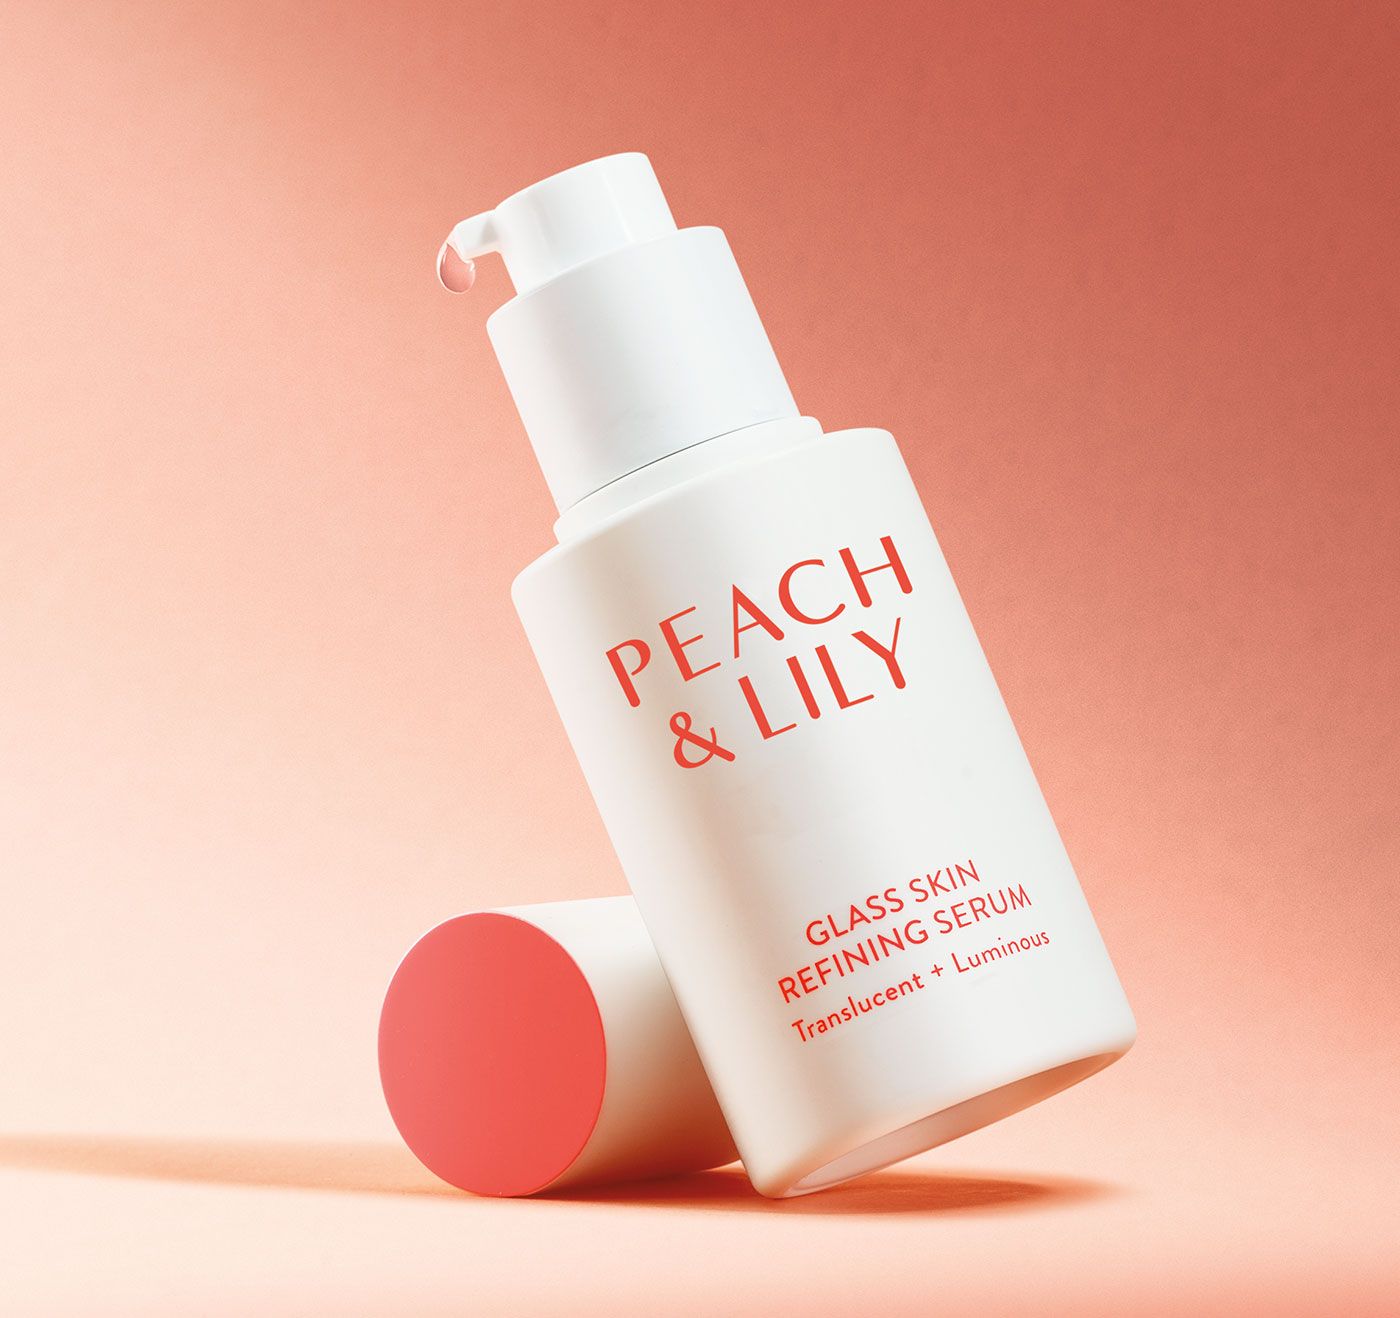 Peach & Lily  Korean Skin Care and K-Beauty Products